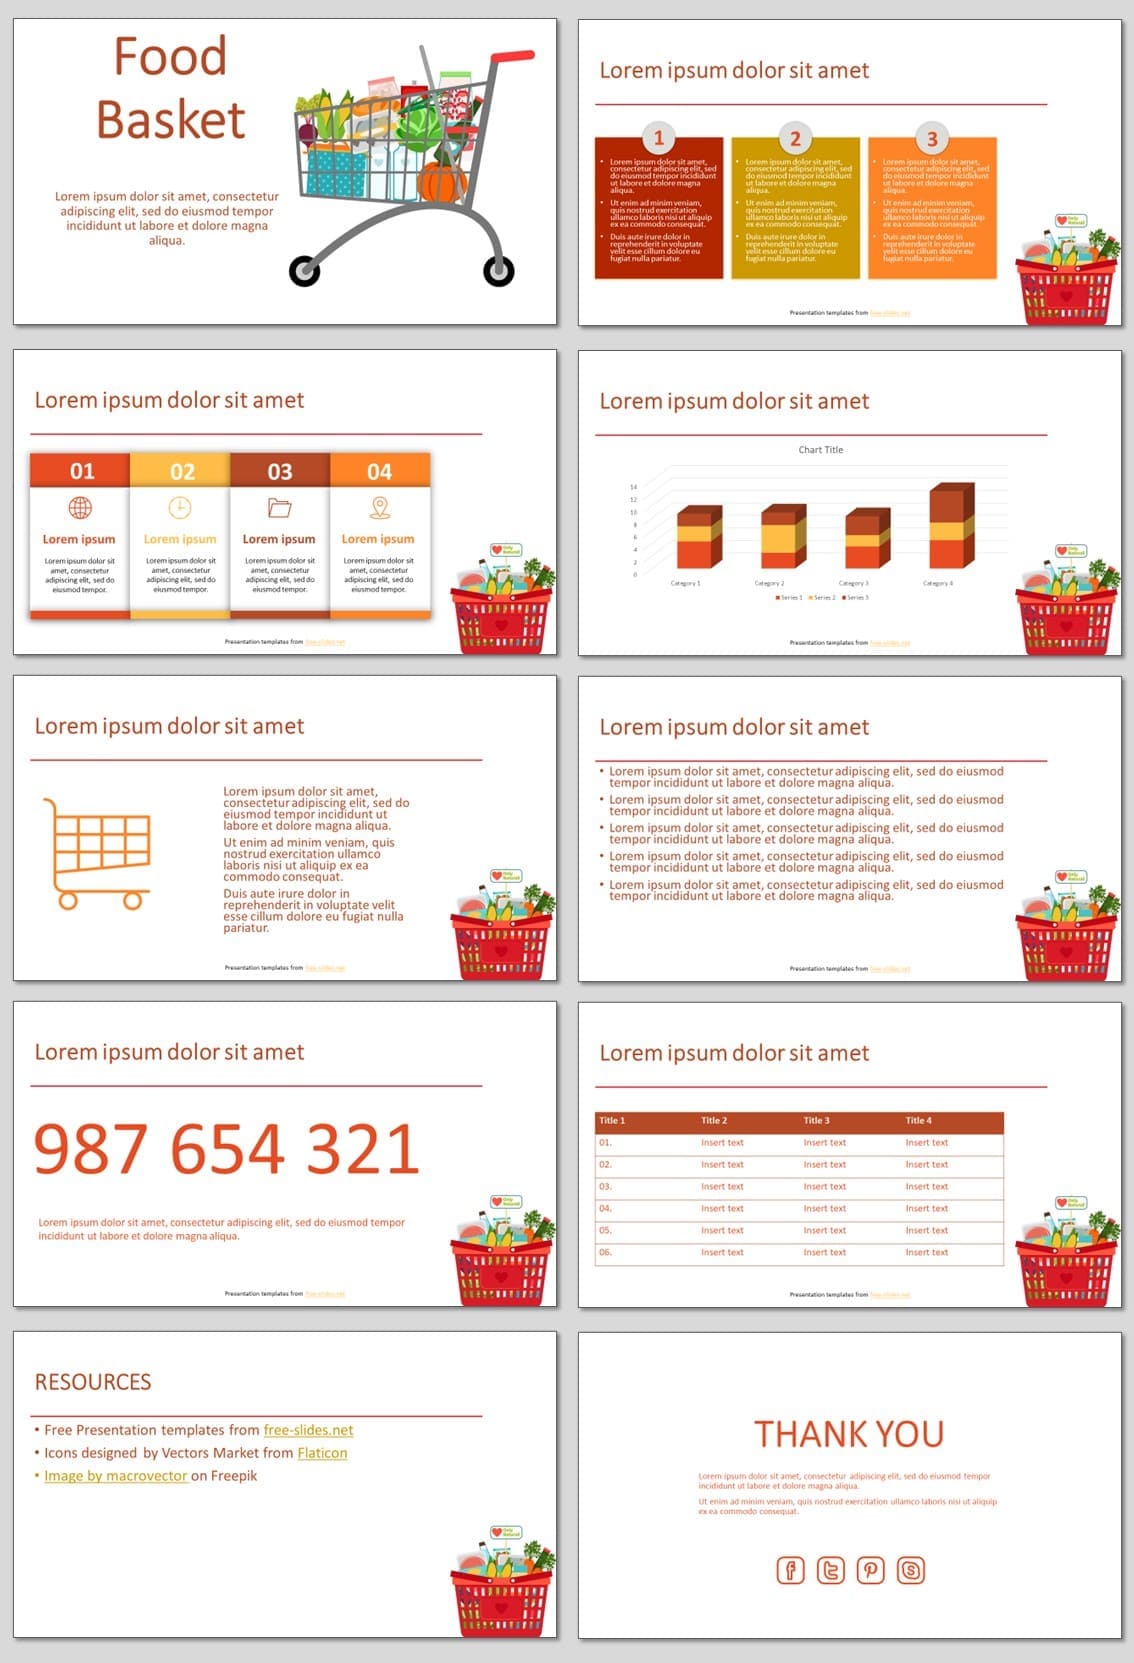 Food Basket - Free PowerPoint Template and Google Slides Theme